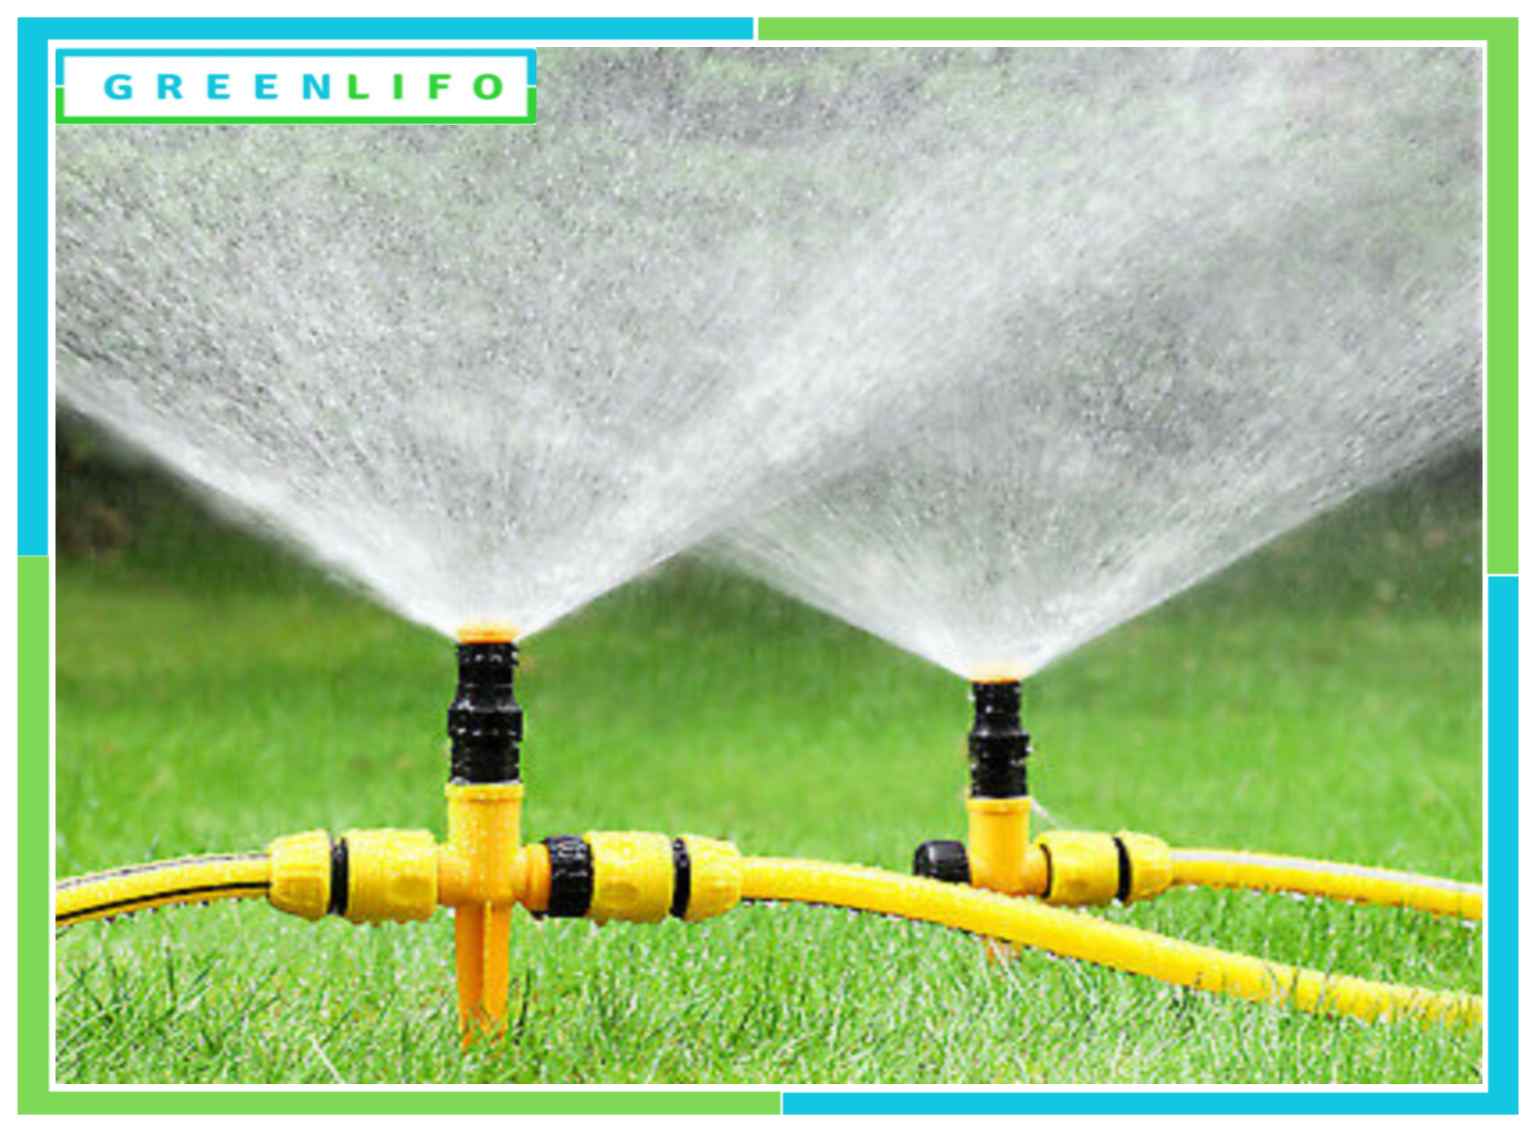 Sprinklers farm tools and equipment